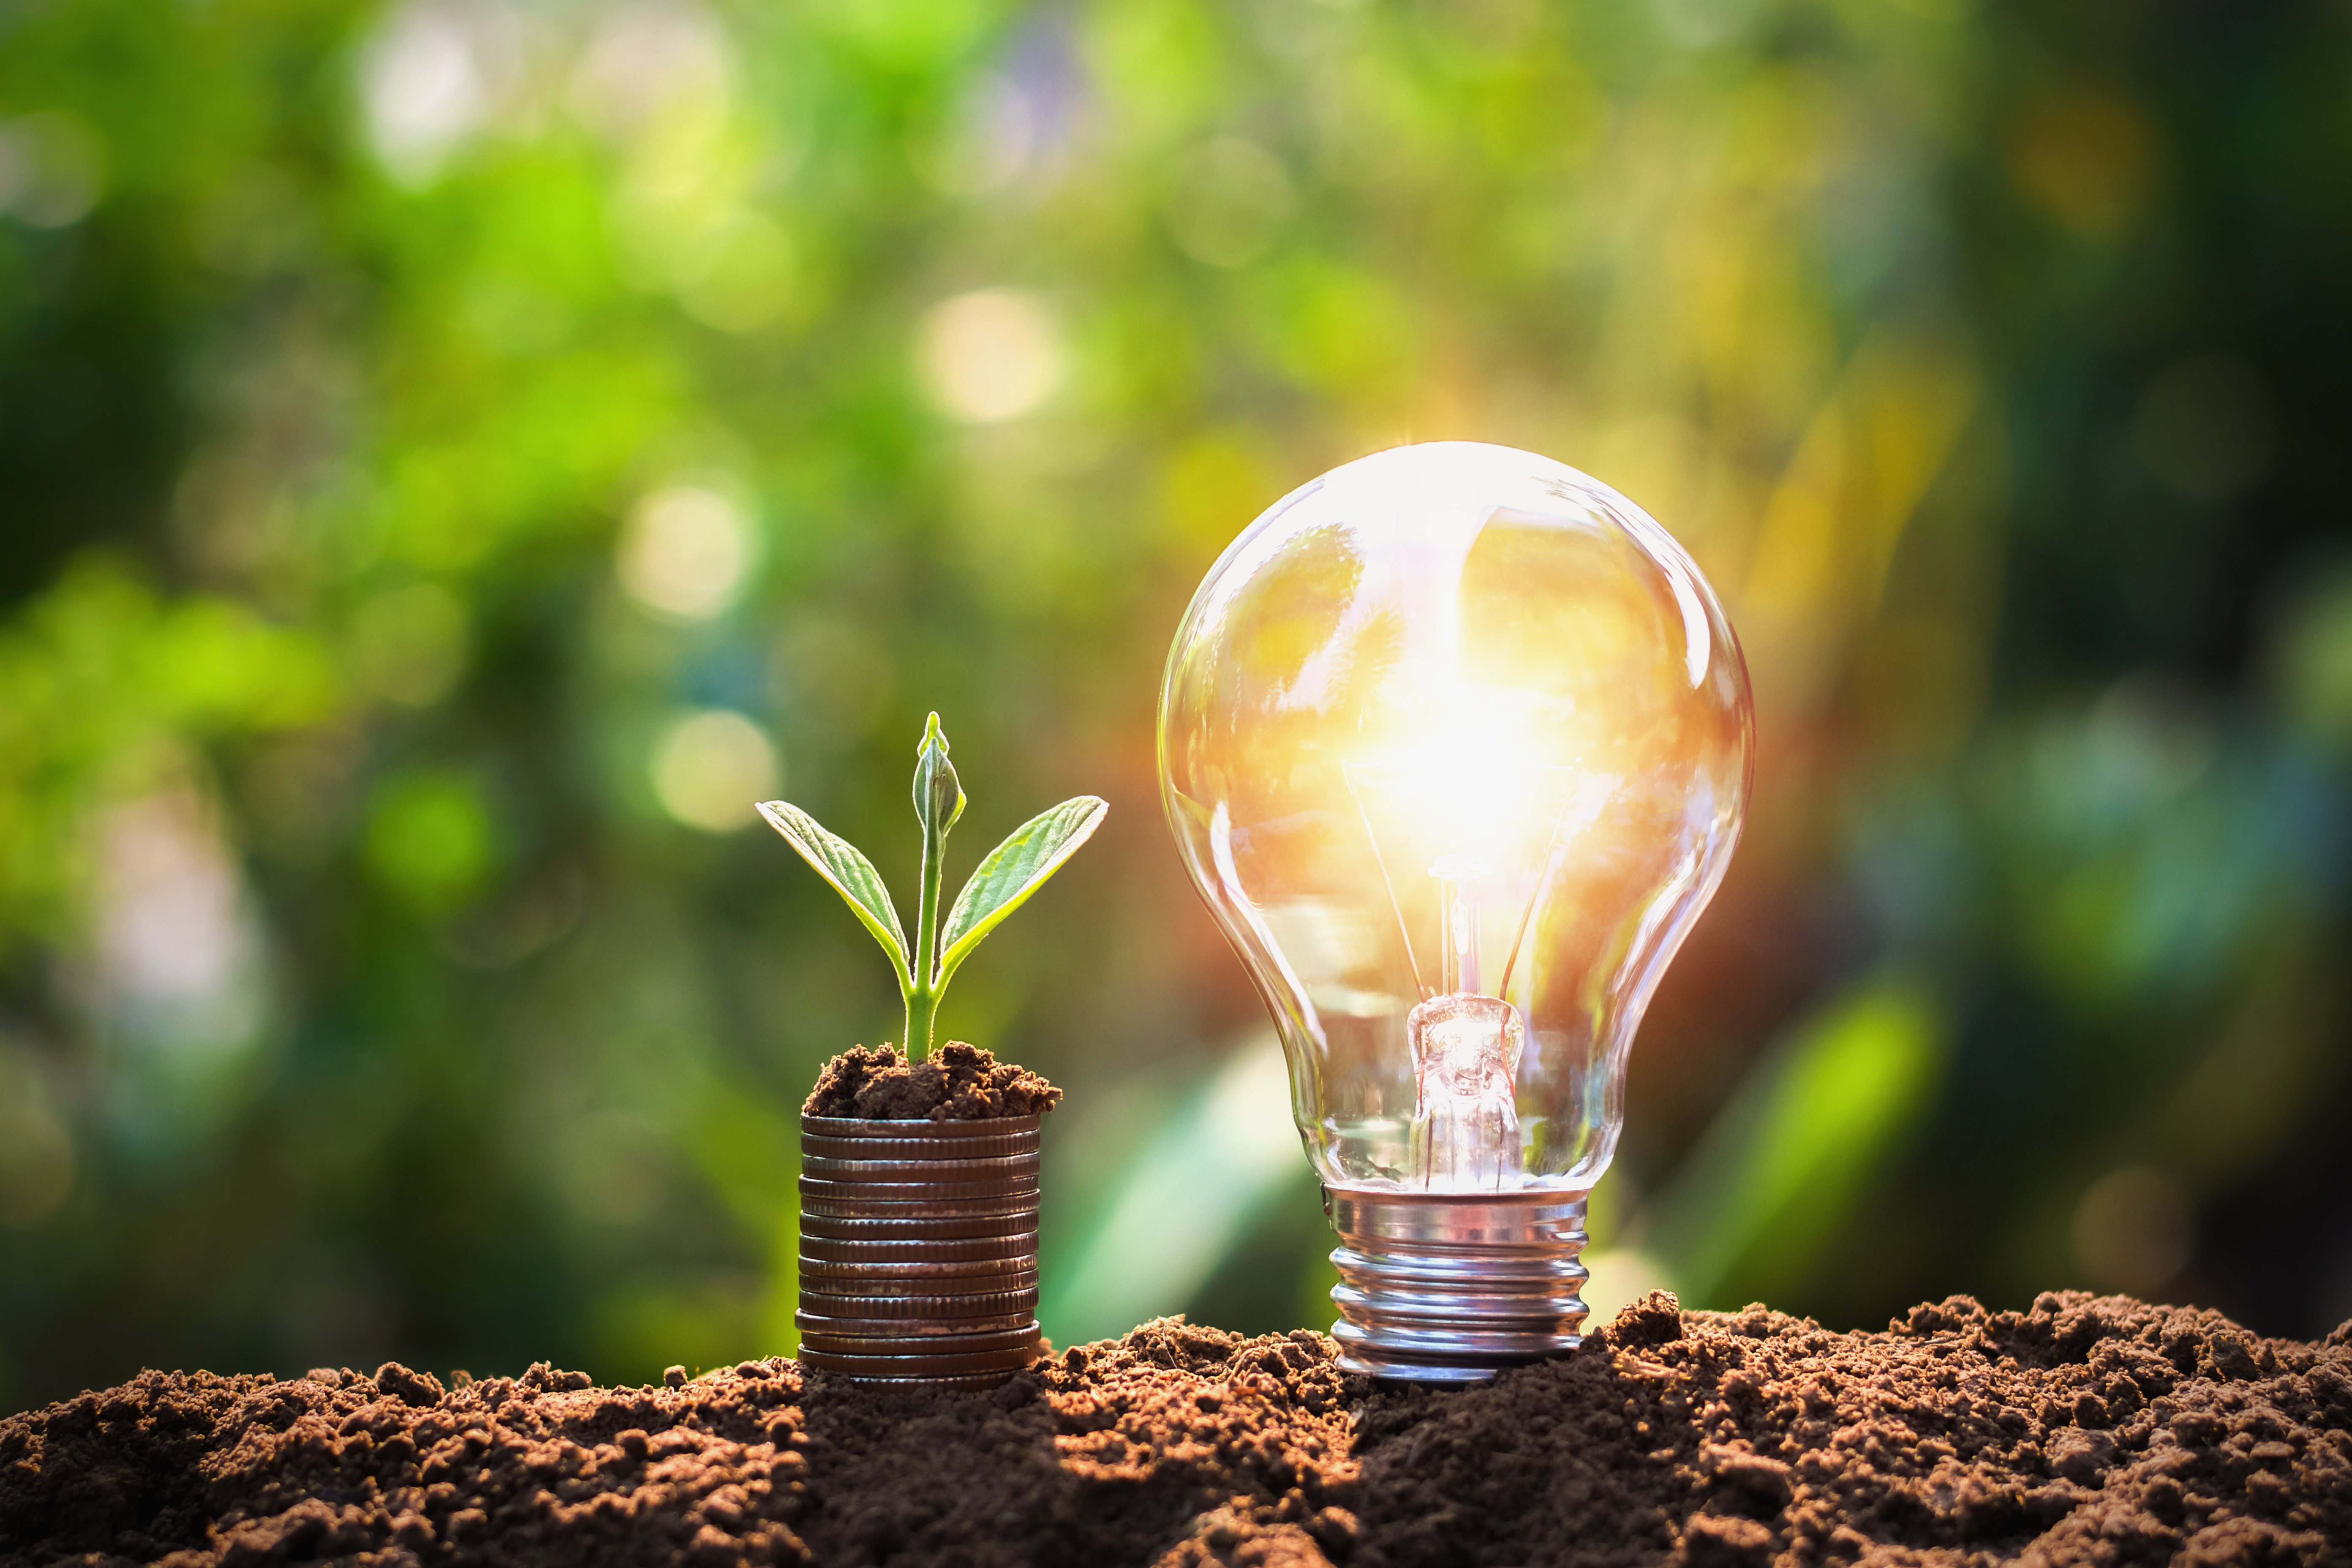 A stack of coins with a plant growing out of them beside a lightbulb that it is lit up sitting on a mound of soil in front of an out of focus green background.